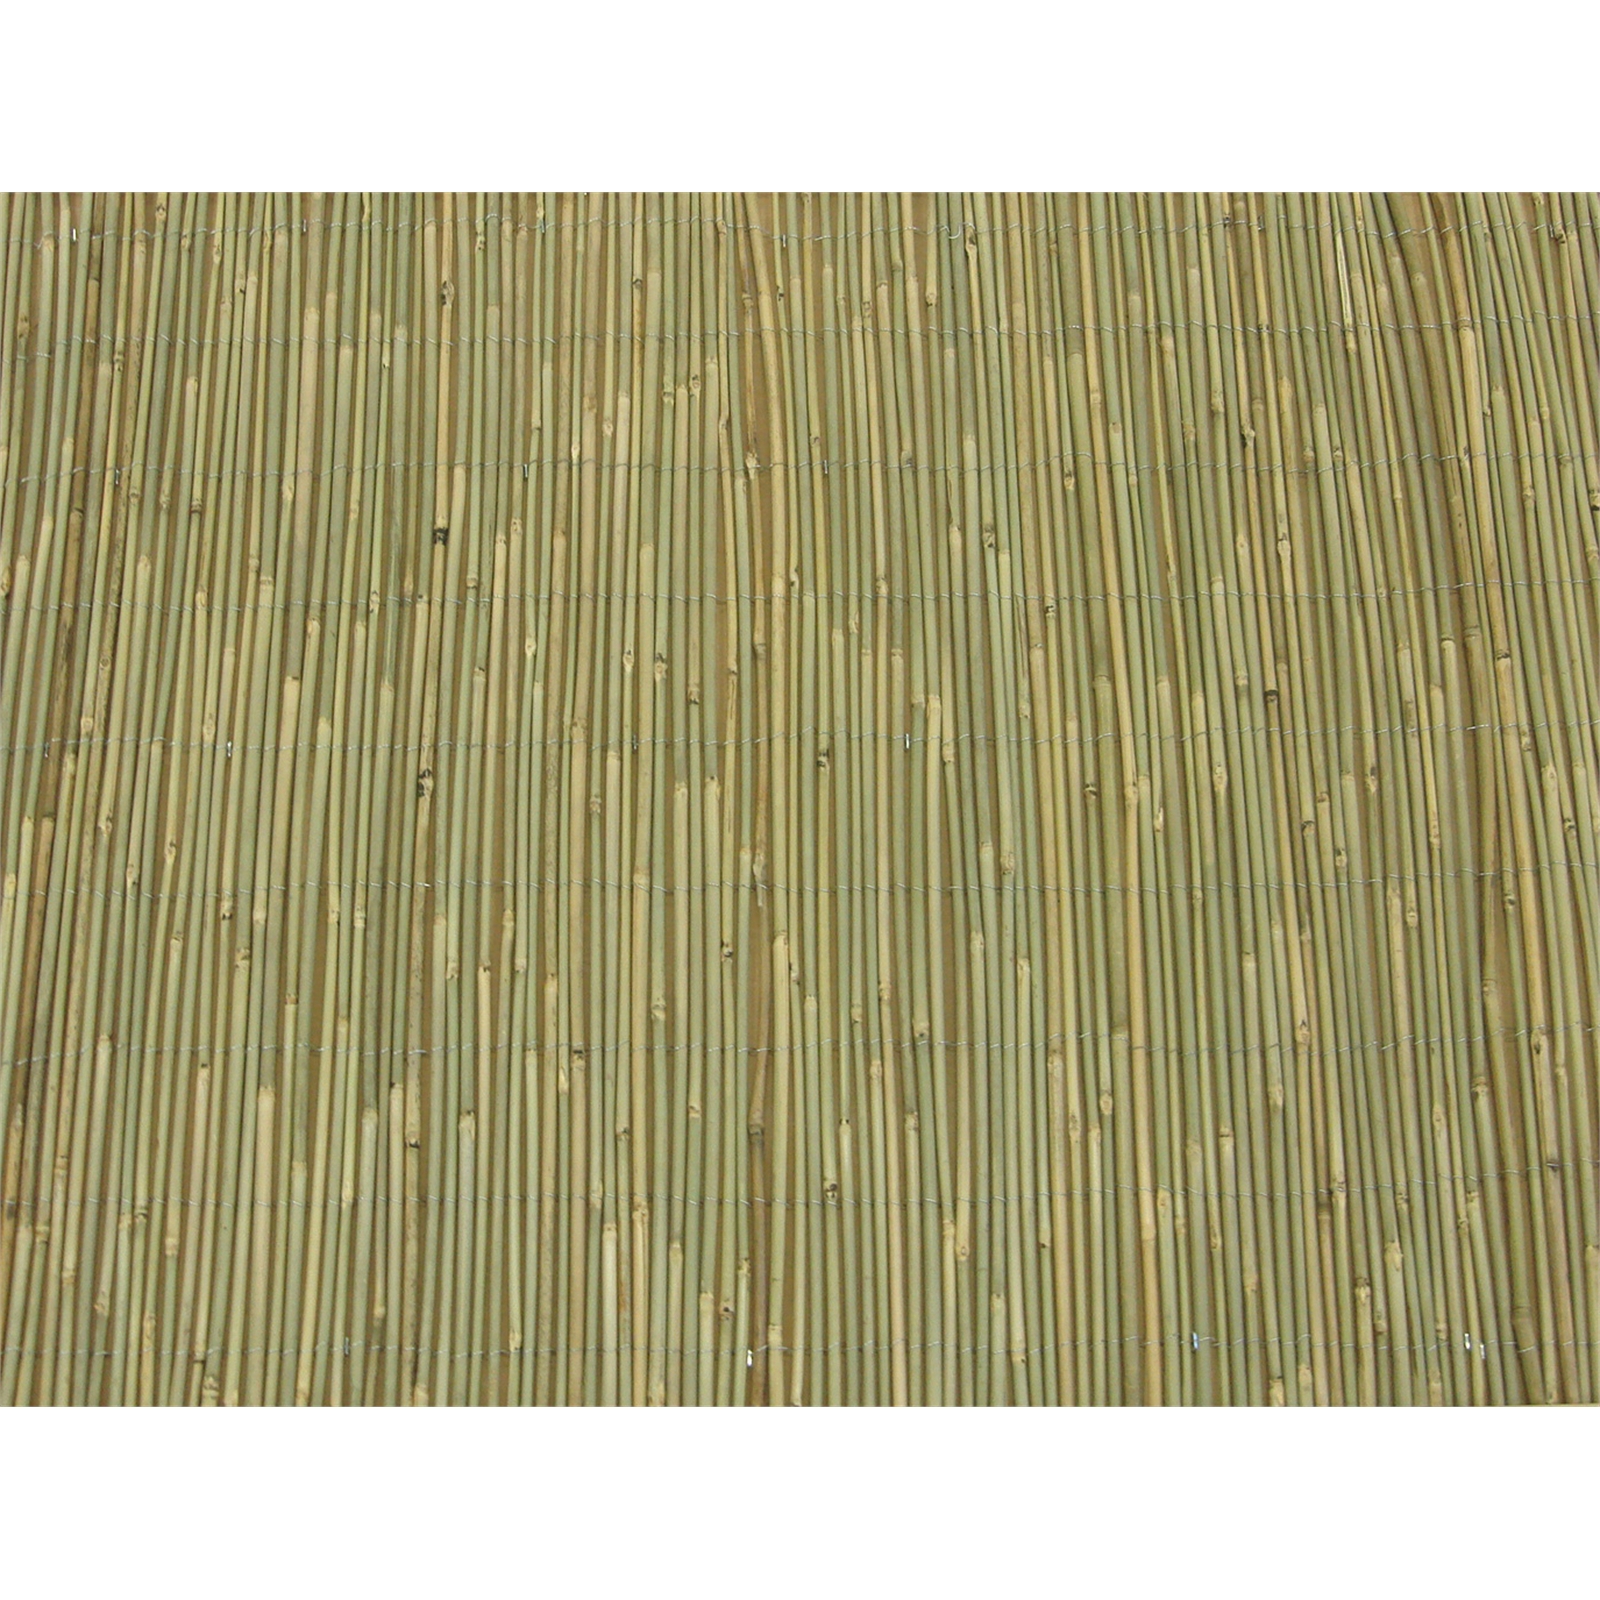 Eden 1.8 x 3m Natural Bamboo Fence Screening